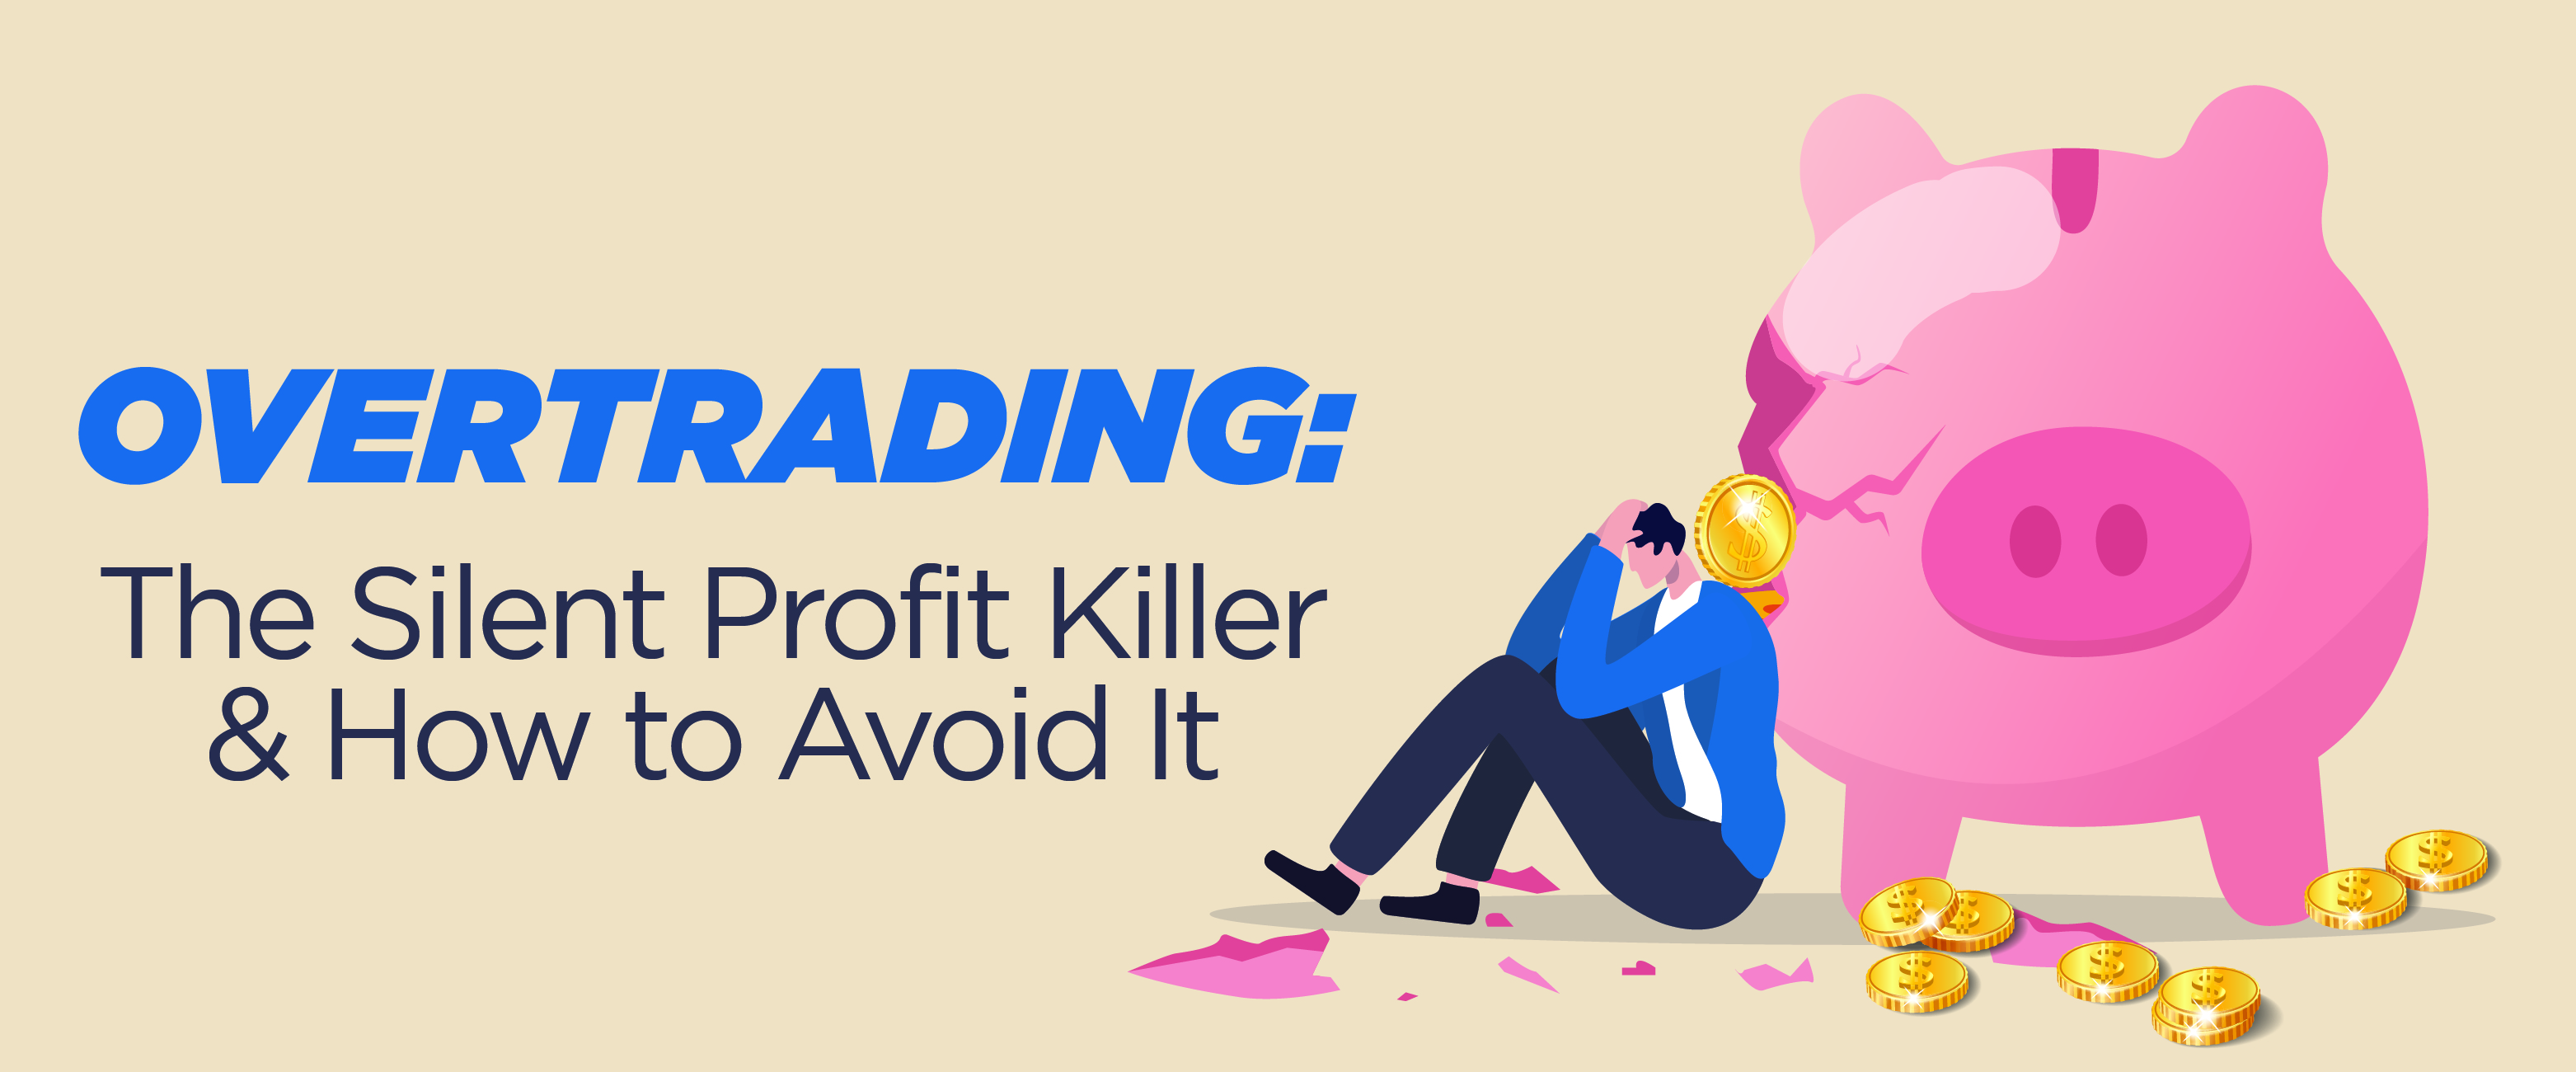 Overtrading: The Silent Profit Killer and How to Avoid It